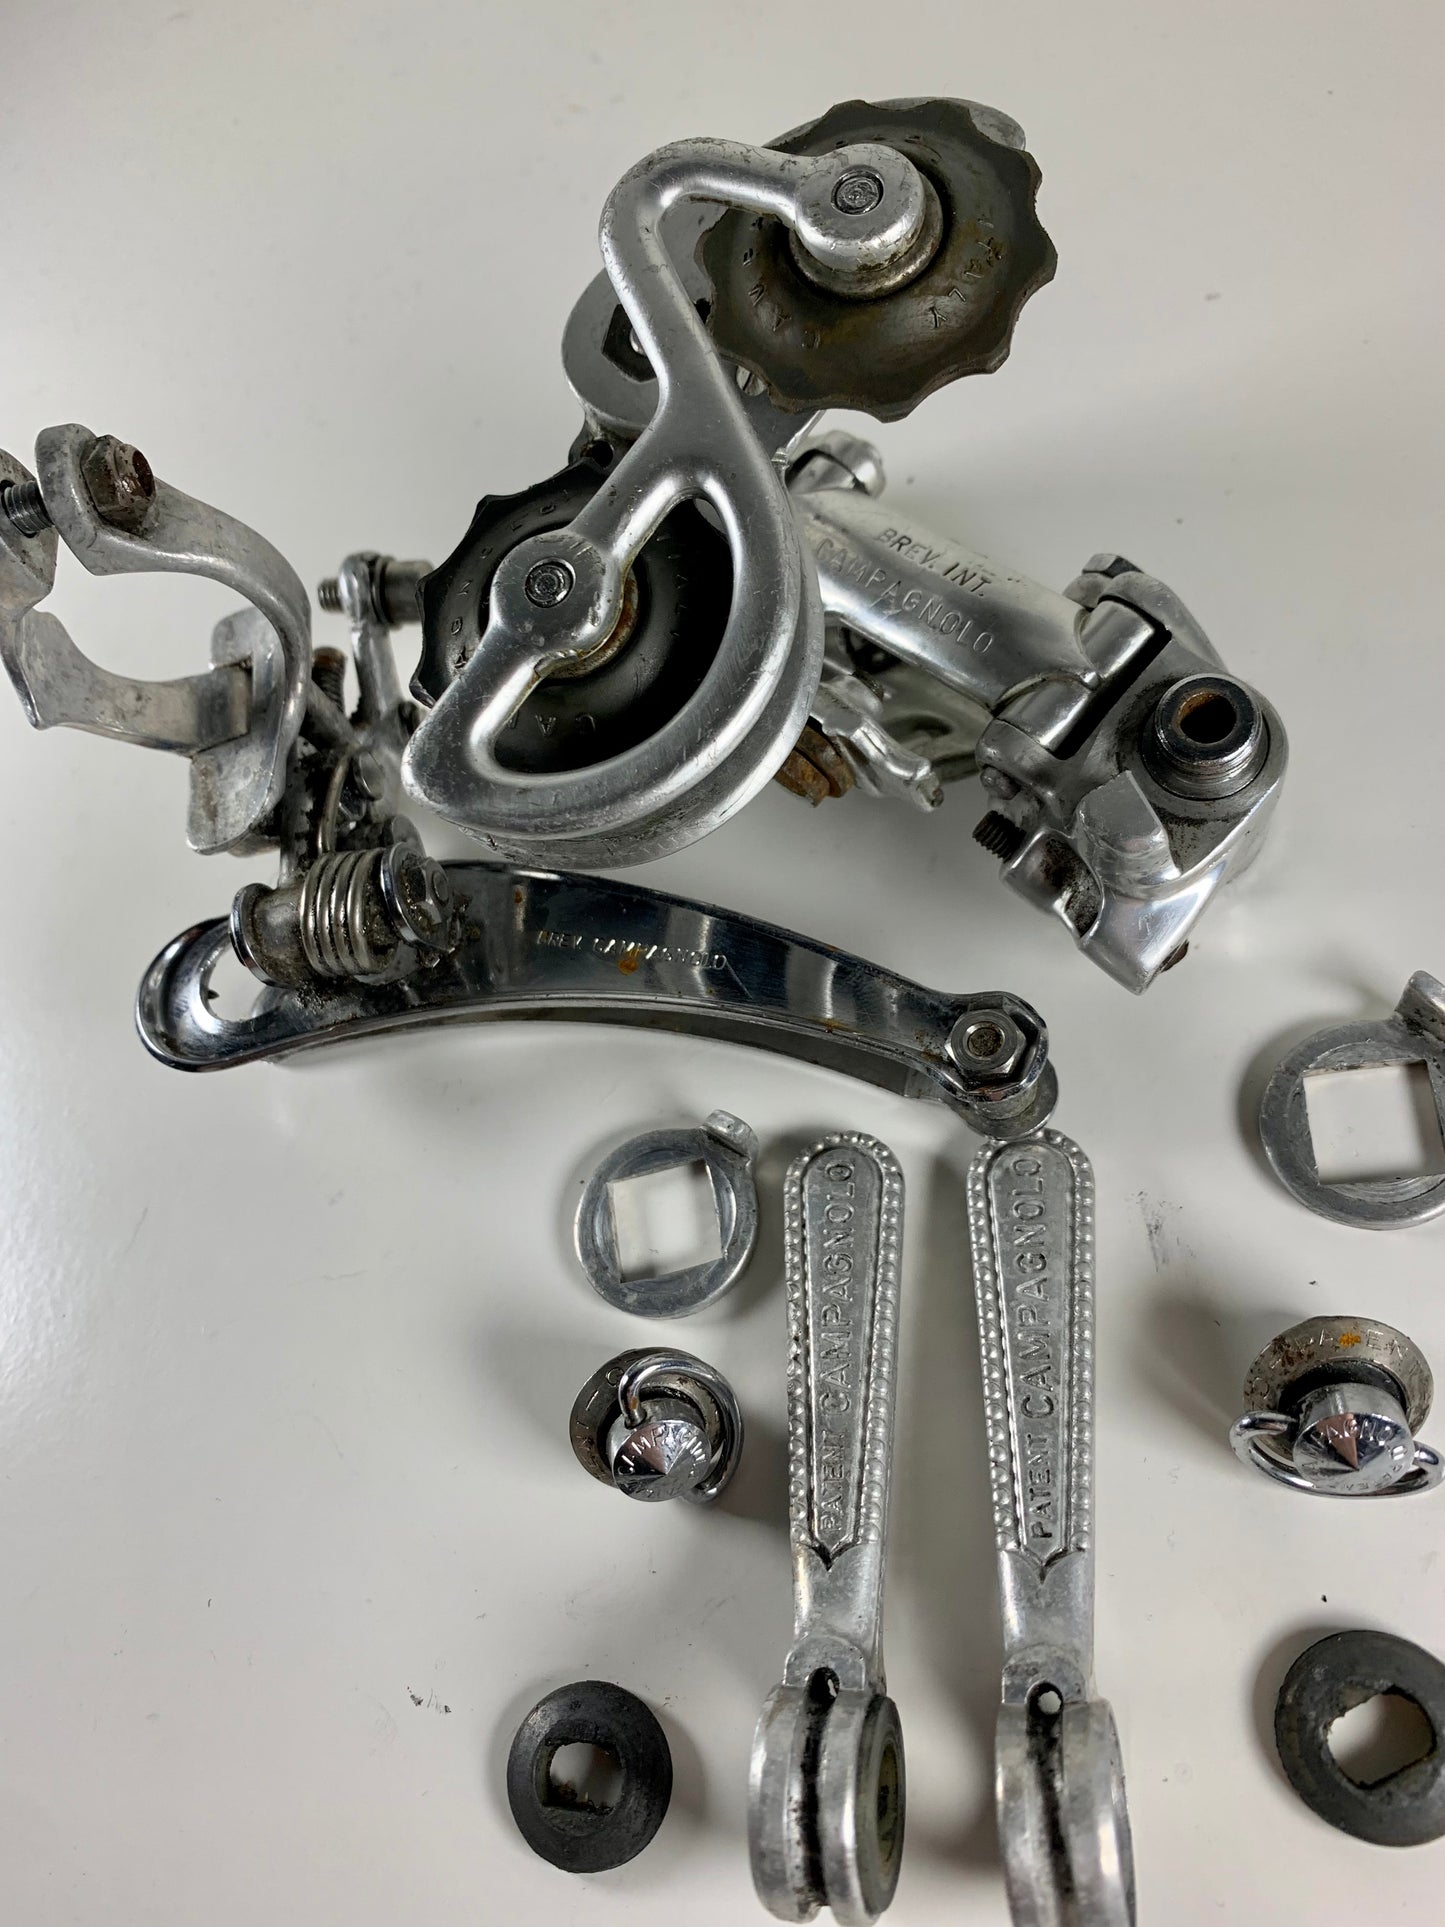 Campagnolo Nuovo Record shifter group